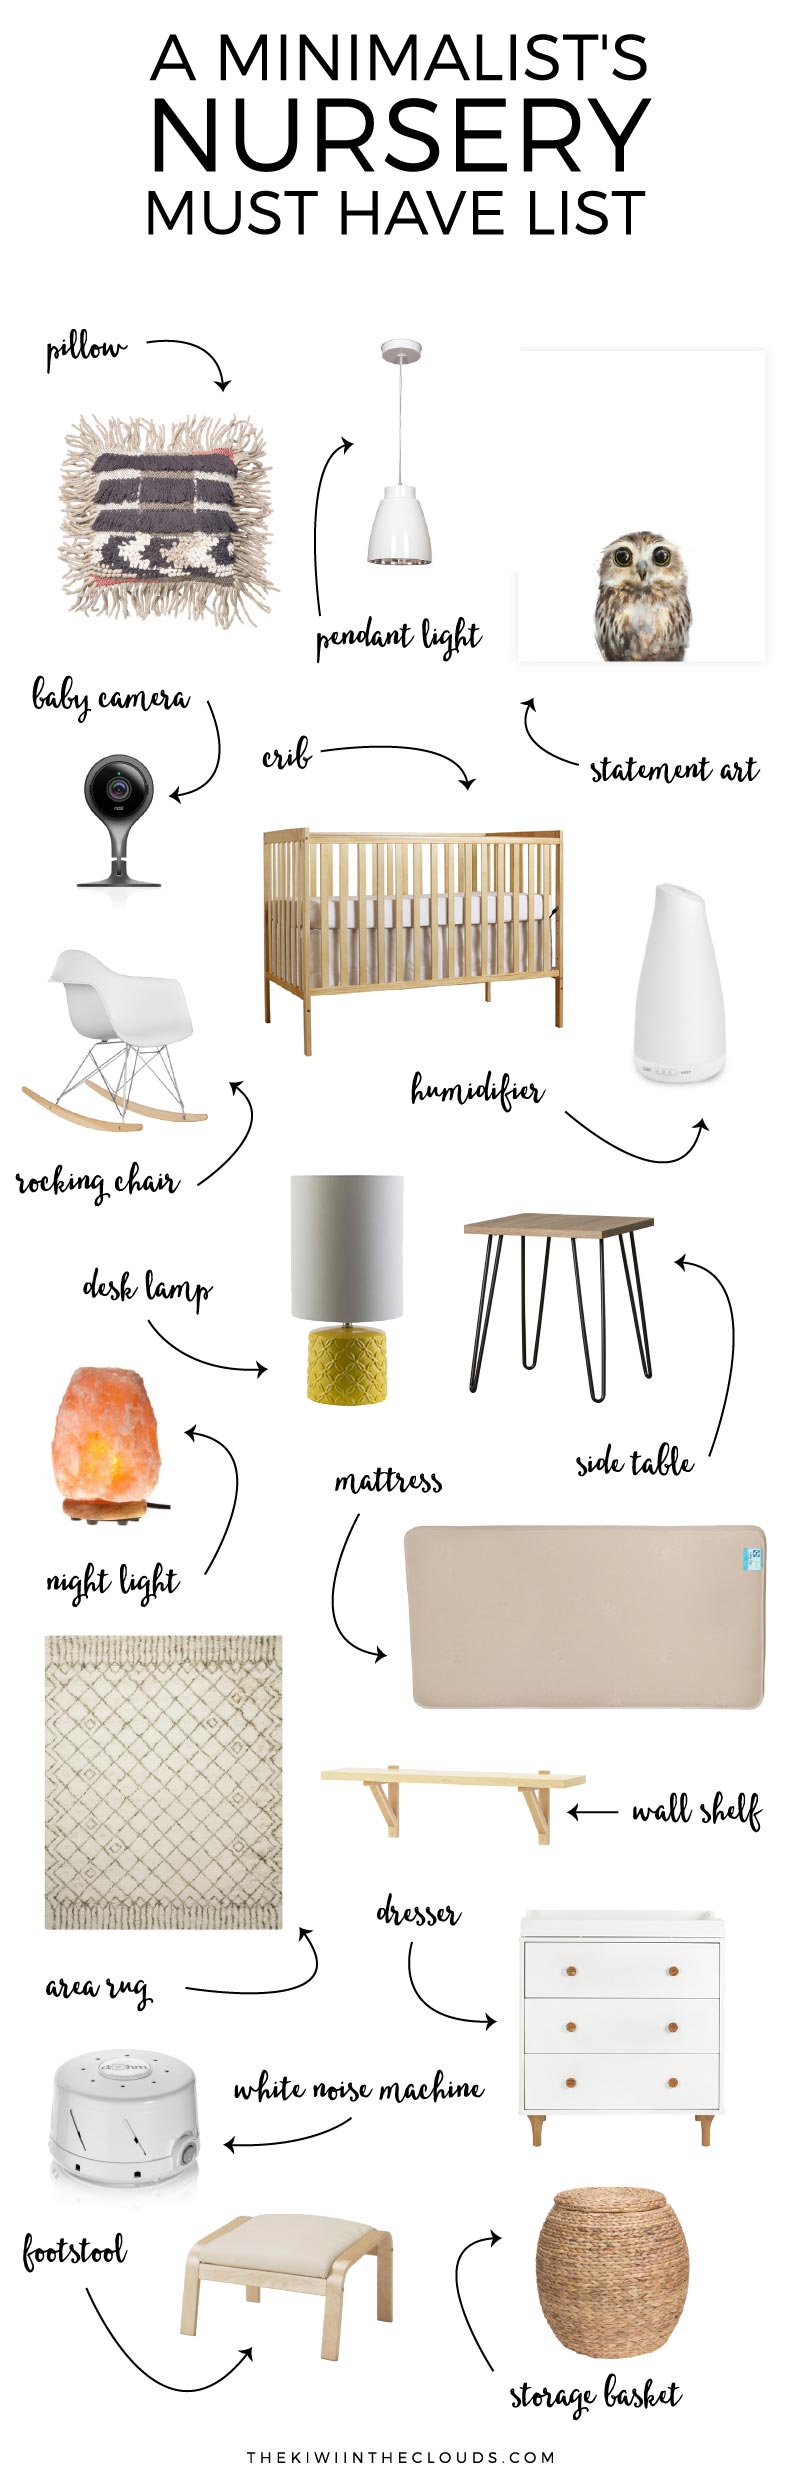 This fabulous guide shows you how to use nursery essentials to create a minimalist nursery filled with style and function. And bonus: it comes with a FREE nursery planning checklist! Click through for all the source details and to download your free checklist.